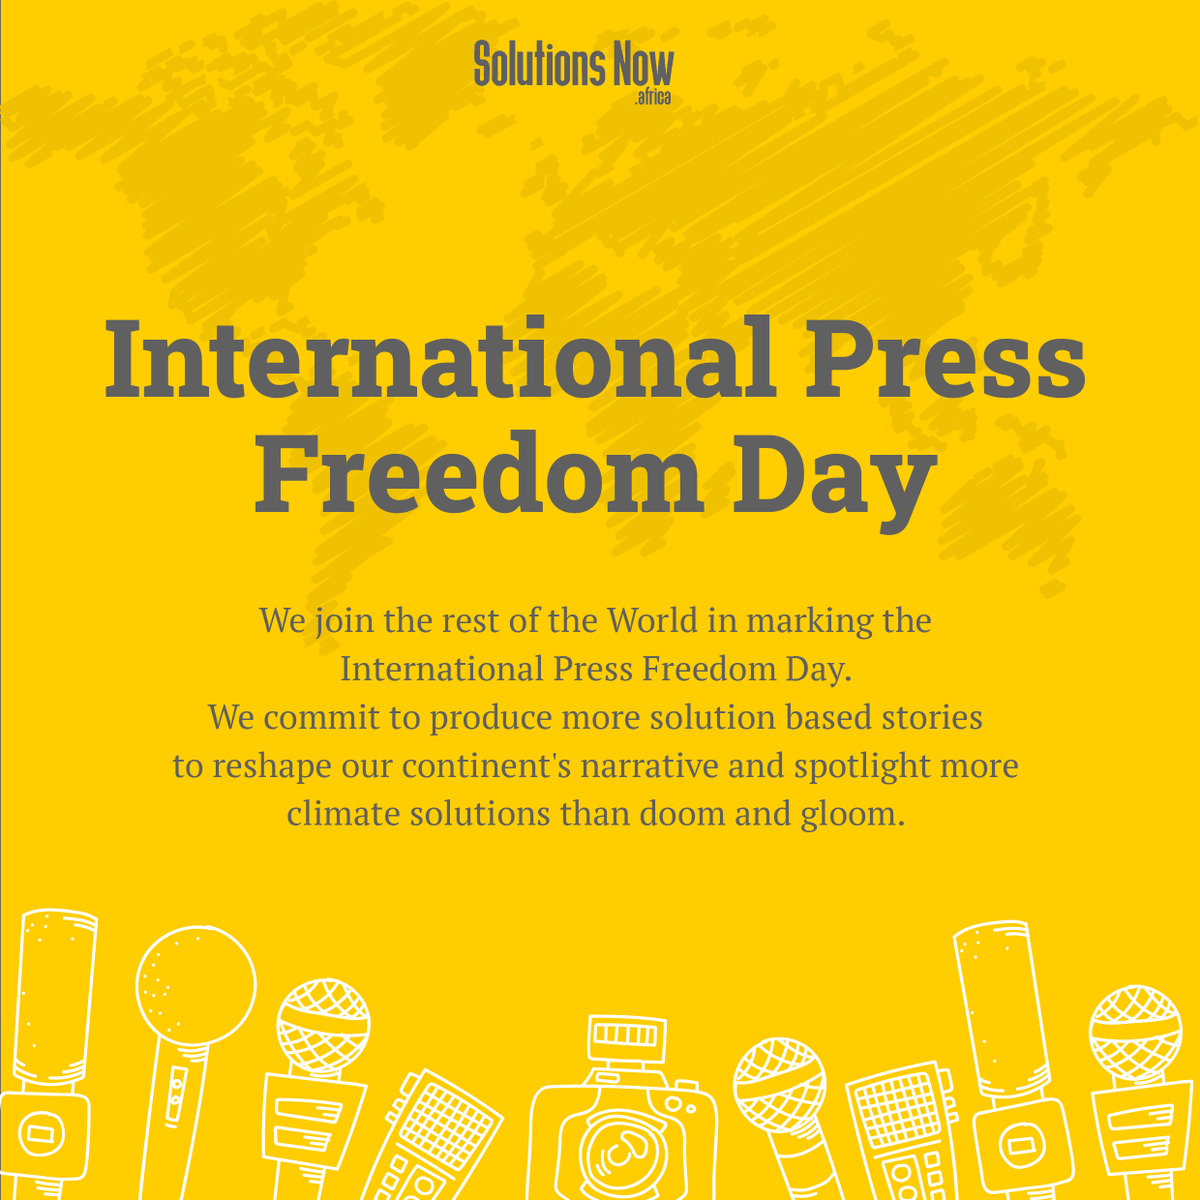 'Journalists improve society in two ways: 1⃣spotlight harmful things2⃣spotlight helpful things' As we celebrate the #WorldPressFreedomDay we commit to covering more responses to the problems in our society. #SolutionsNowAfrica #Sojo #JournalismCanMaketheWorldaBetterPlace